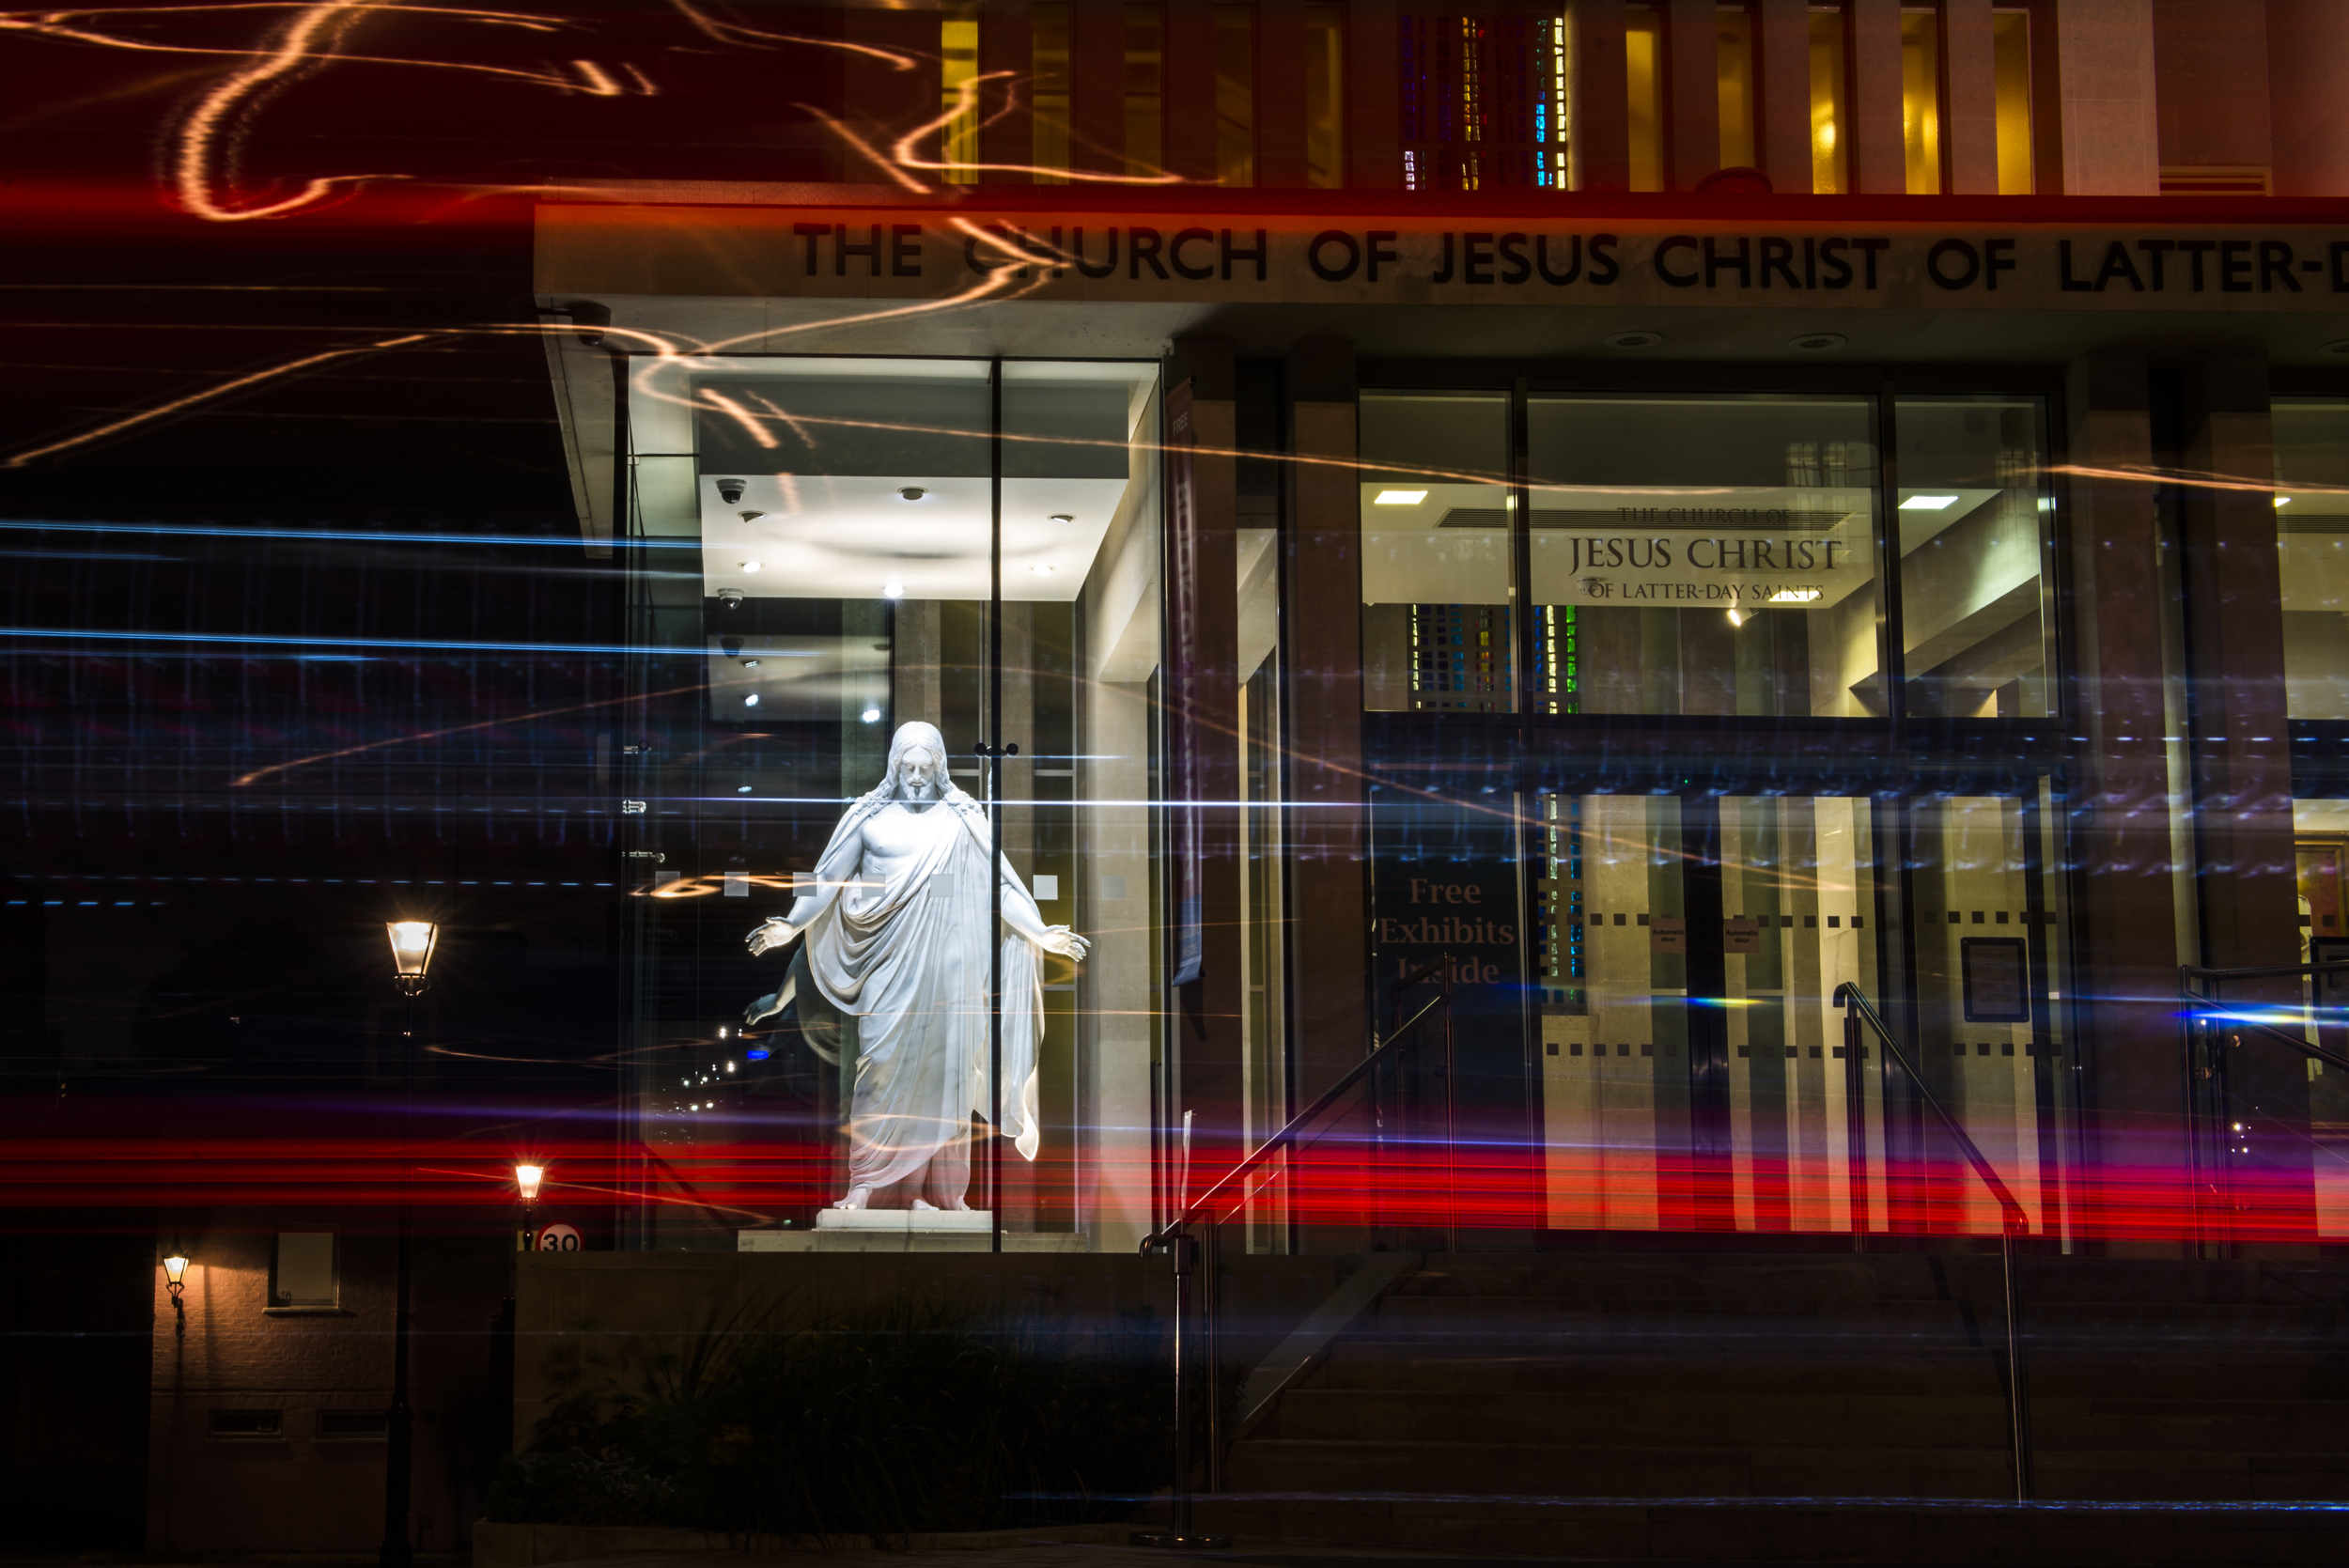  A statue of Jesus is illuminated at night at the Church of Jesus Christ of Latter Day Saints.  